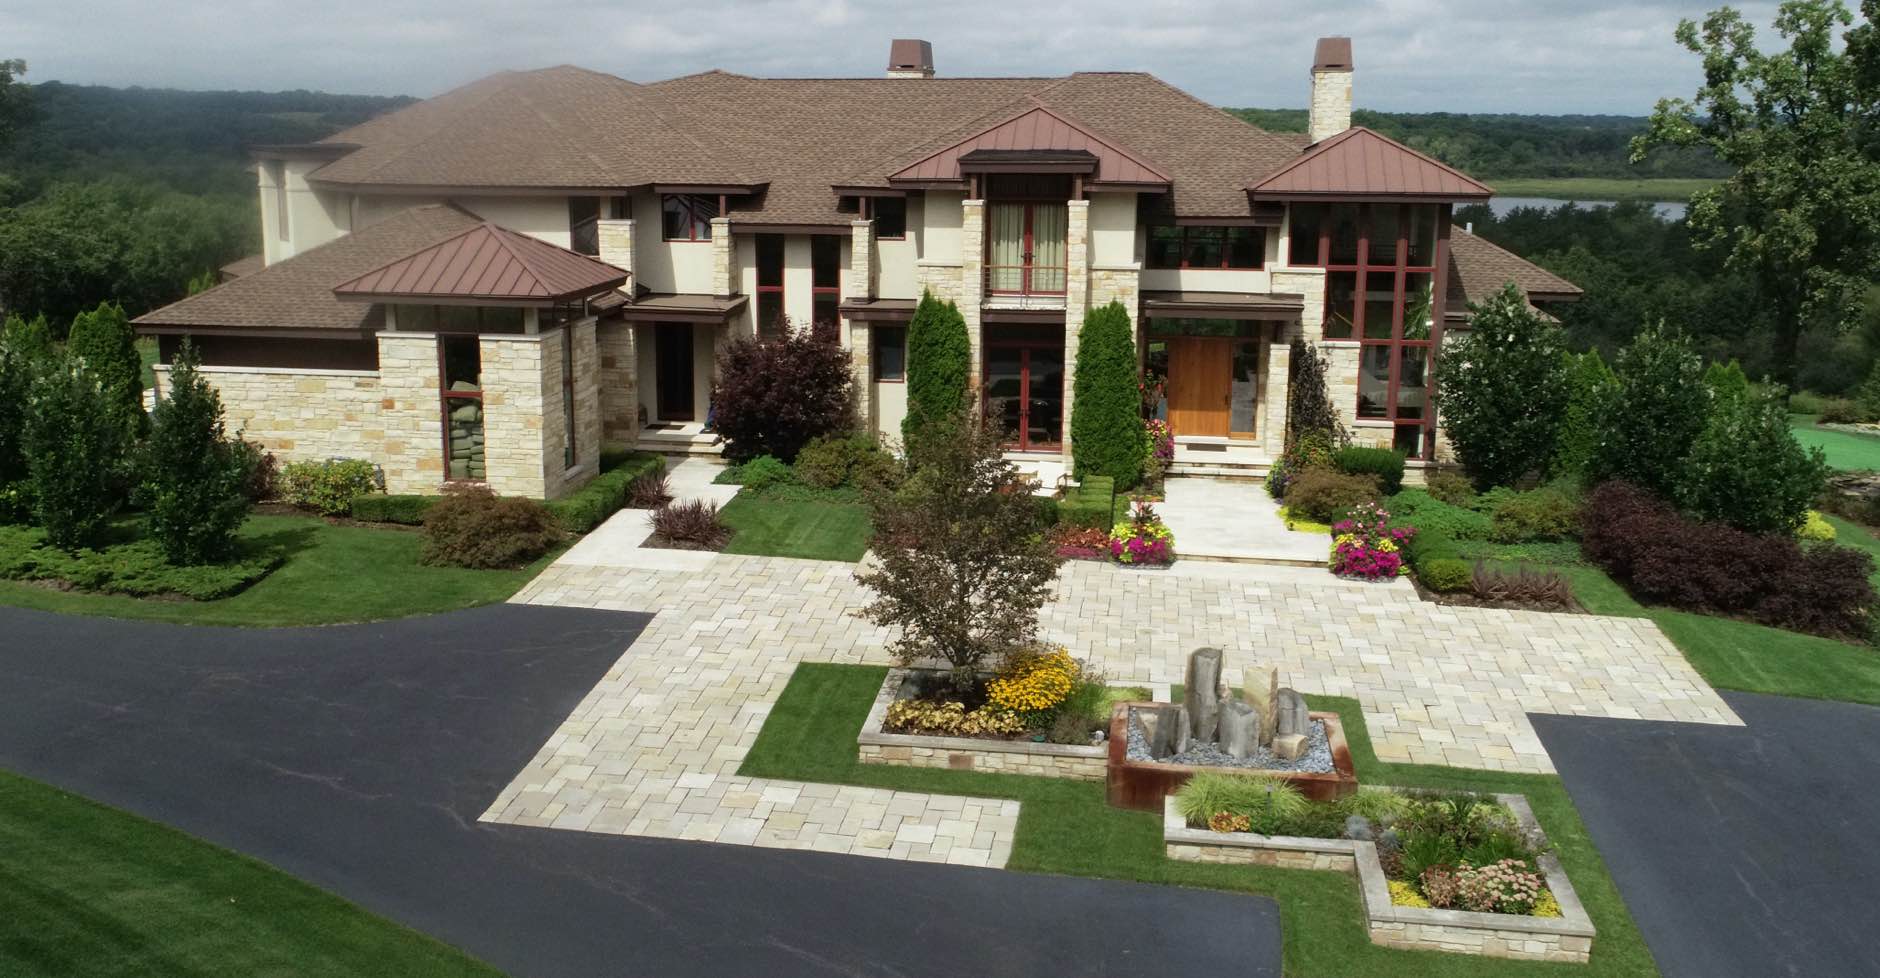 High-angle view of front of home with recticlinear pavers and plantings